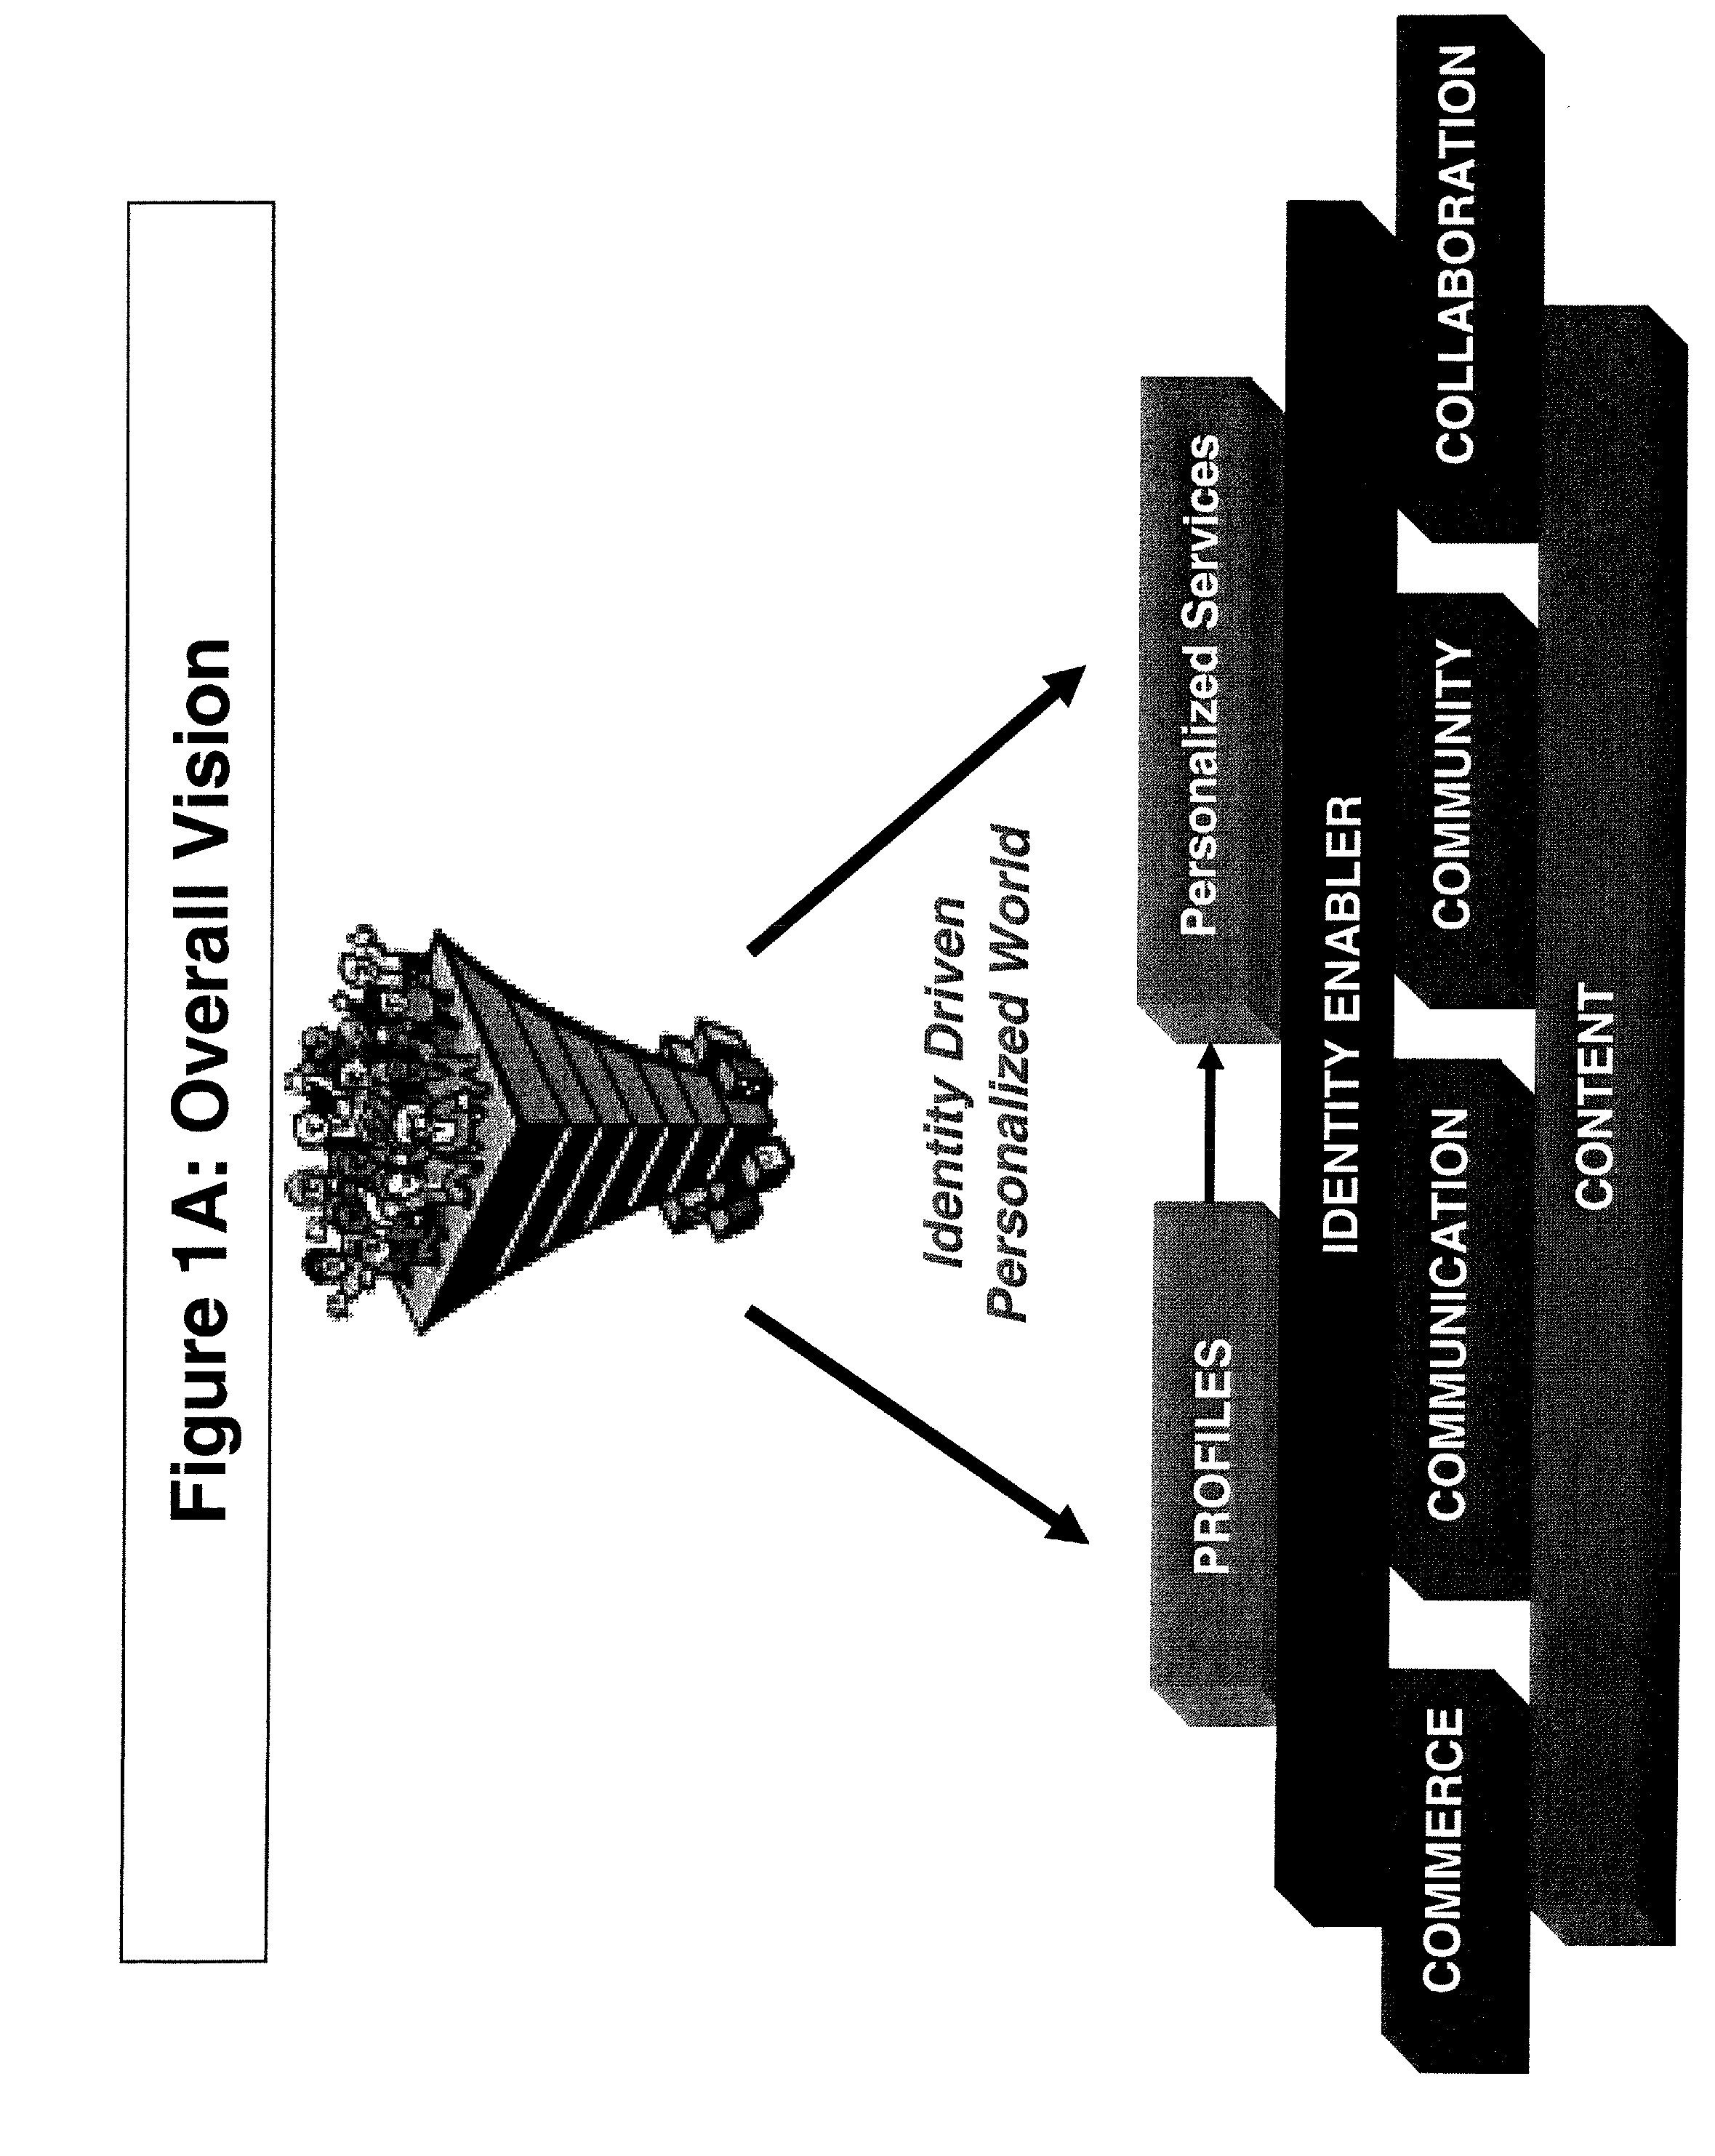 Method and apparatus for multi-domain identity interoperability and compliance verification